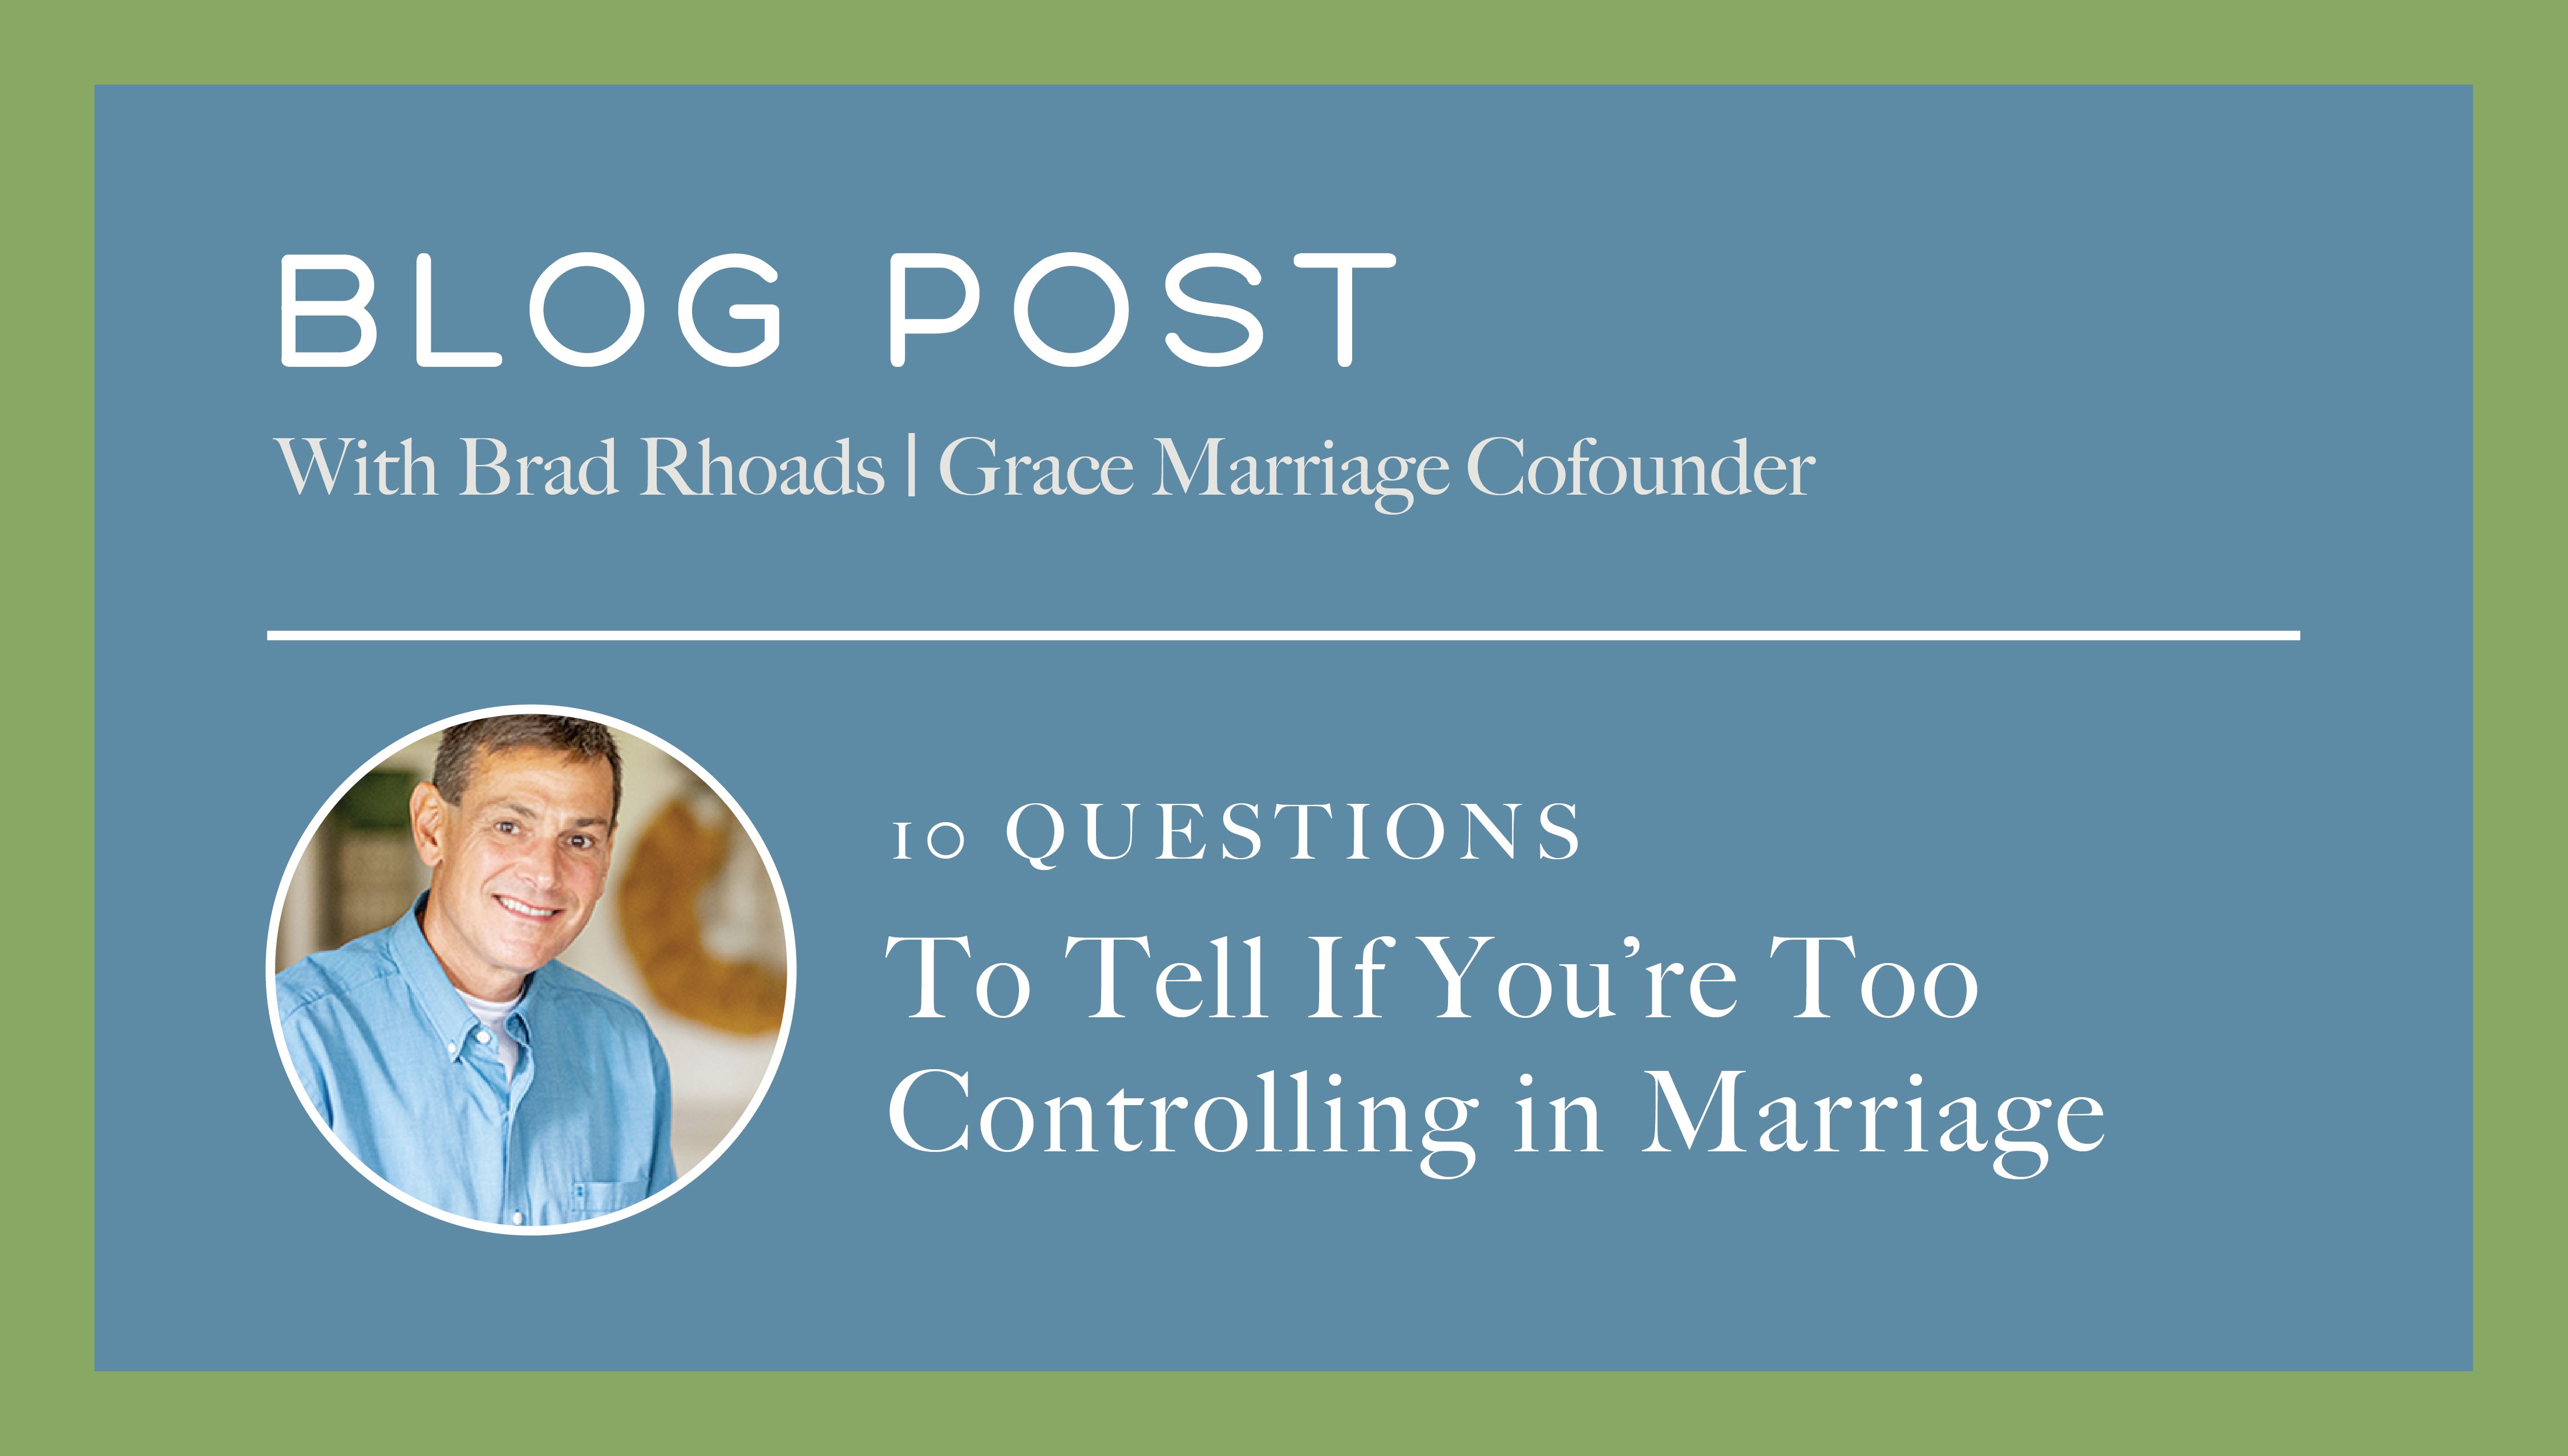 10 Questions To Tell If You’re Too Controlling in Marriage